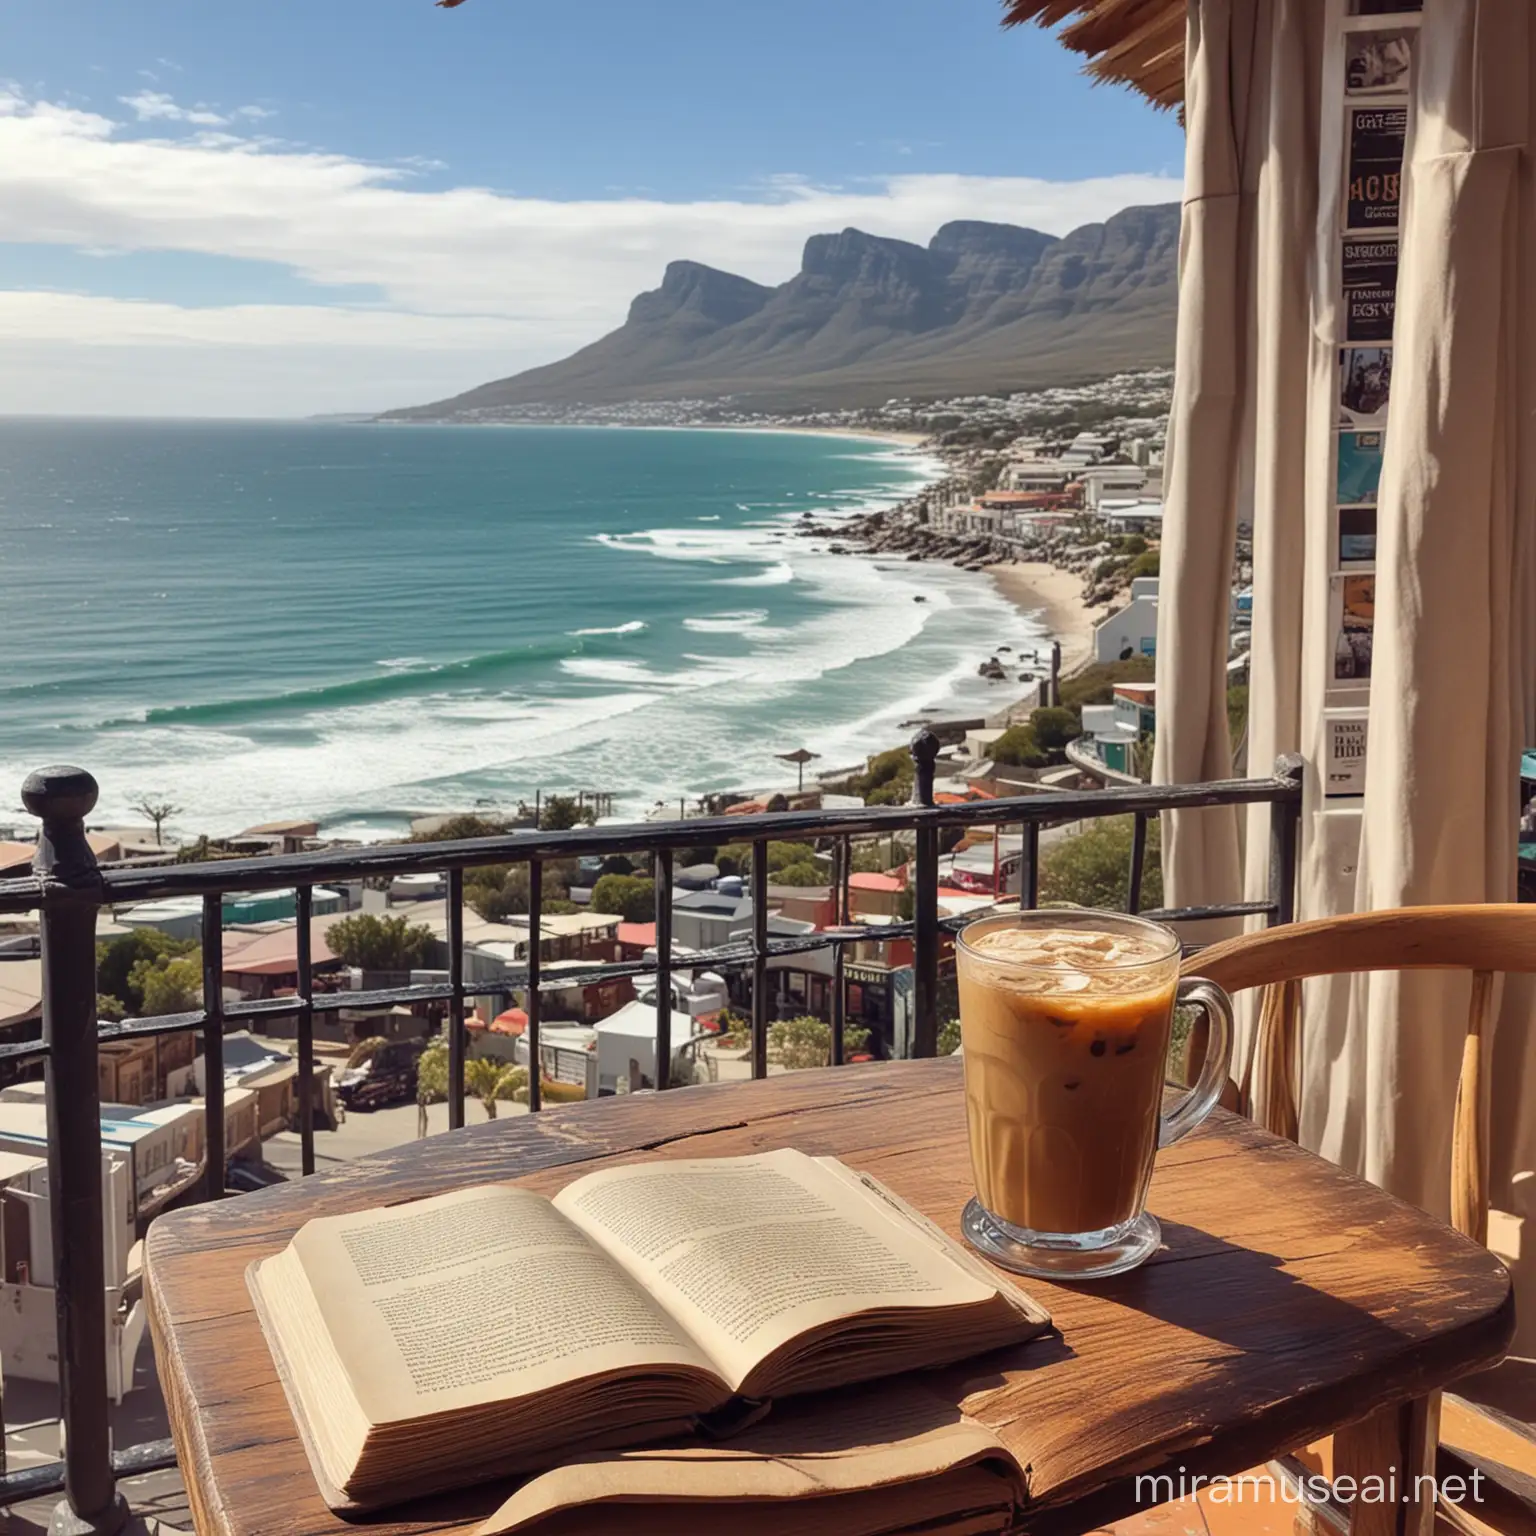 Fantasy Book and Iced Coffee in a Charming Cape Town Caf with Beach View